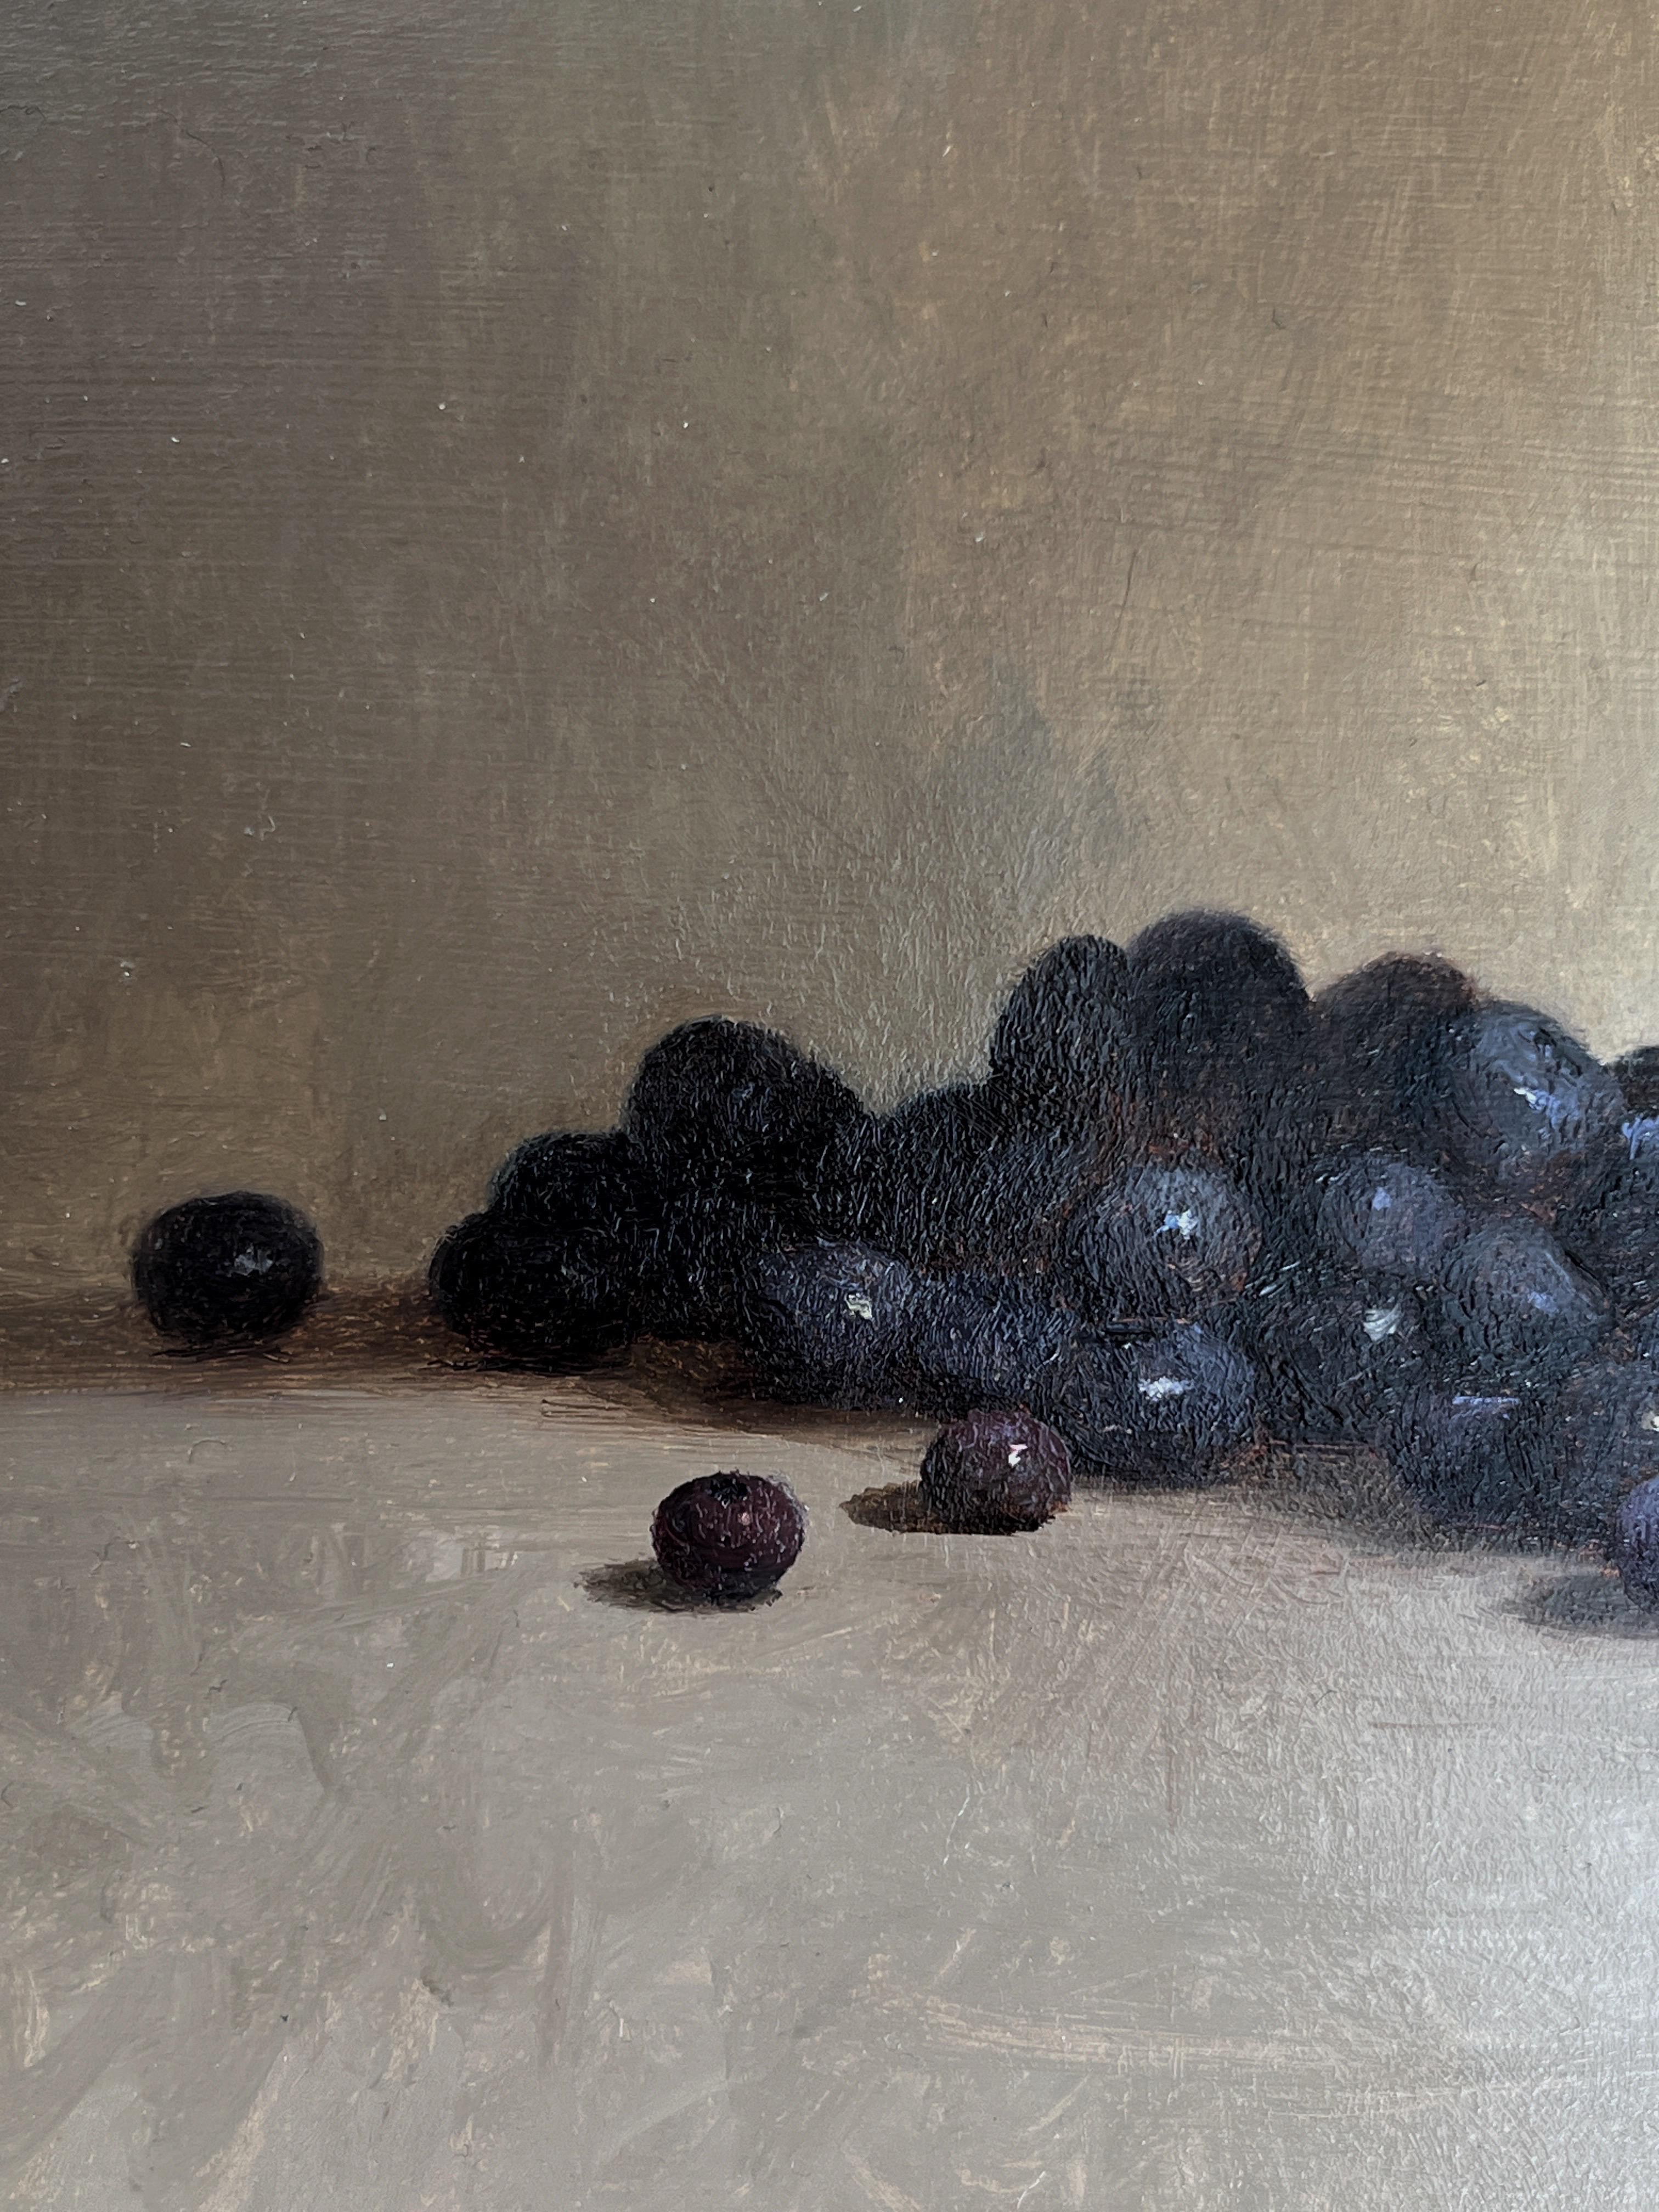 Still Life with Blueberries - American Realist Painting by Dale Zinkowski